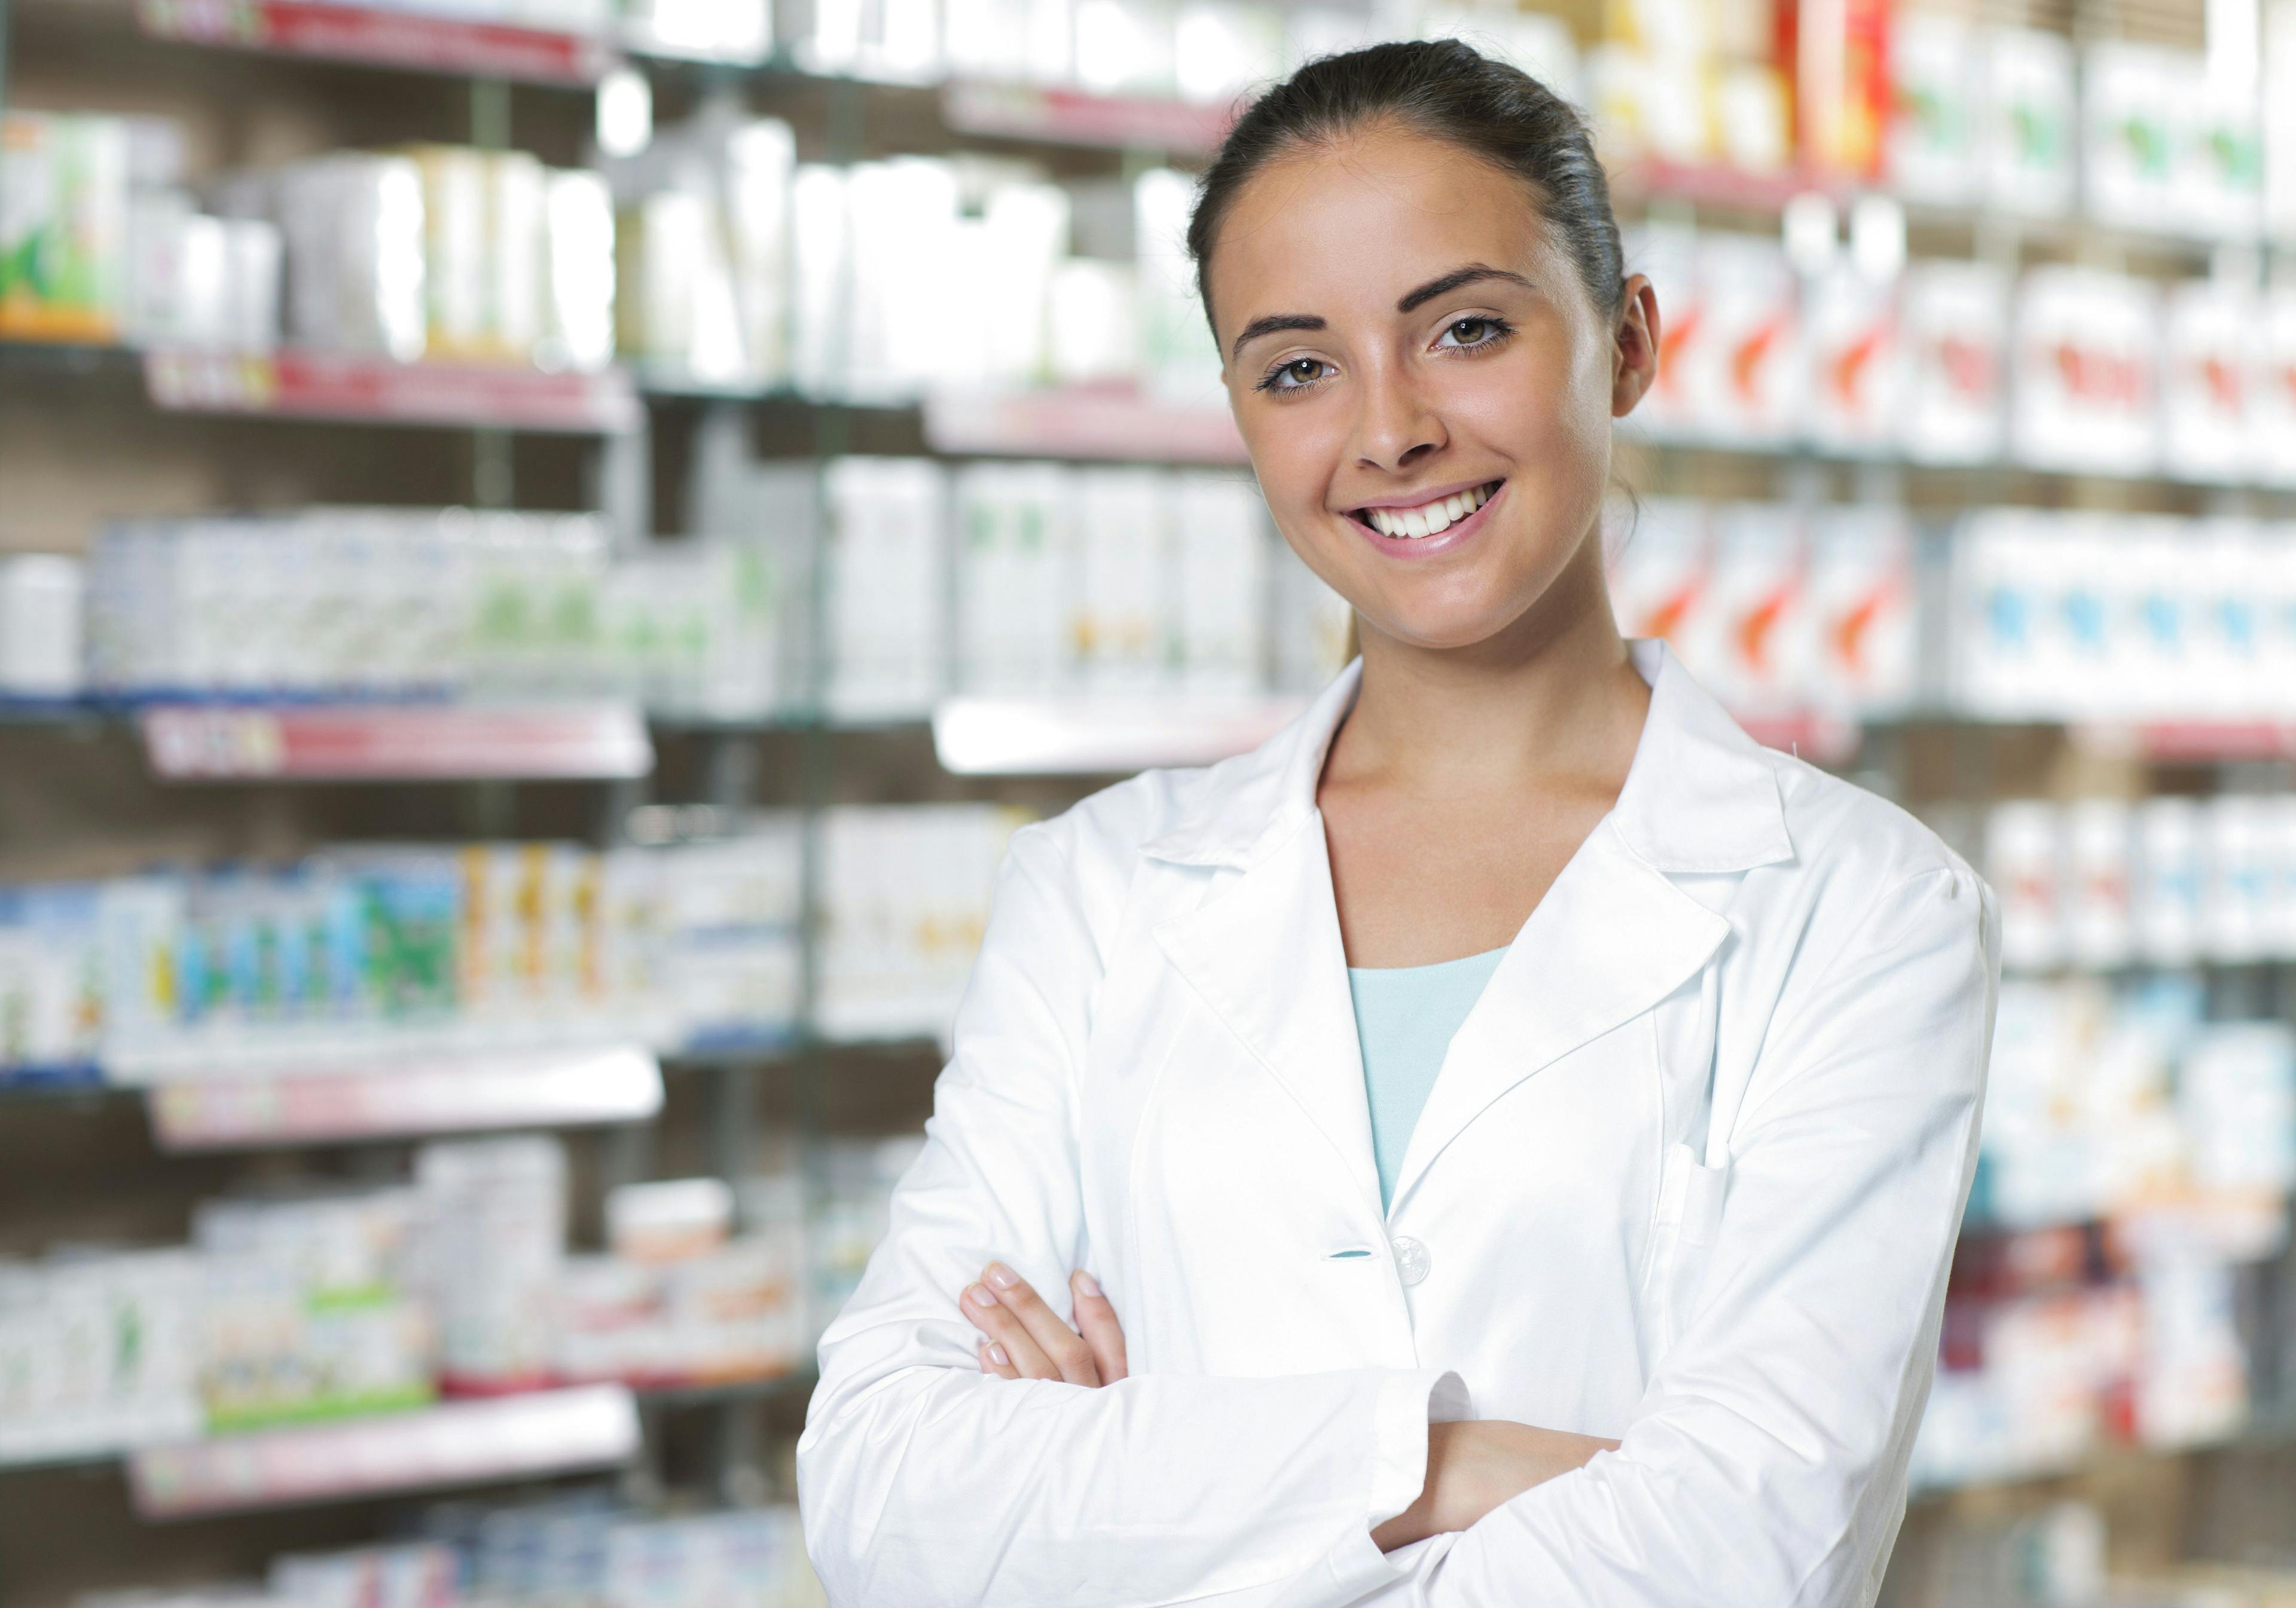 A Career in Pharmacy Continues to Rank in Top 100 Jobs, With Ongoing Growth in the Field